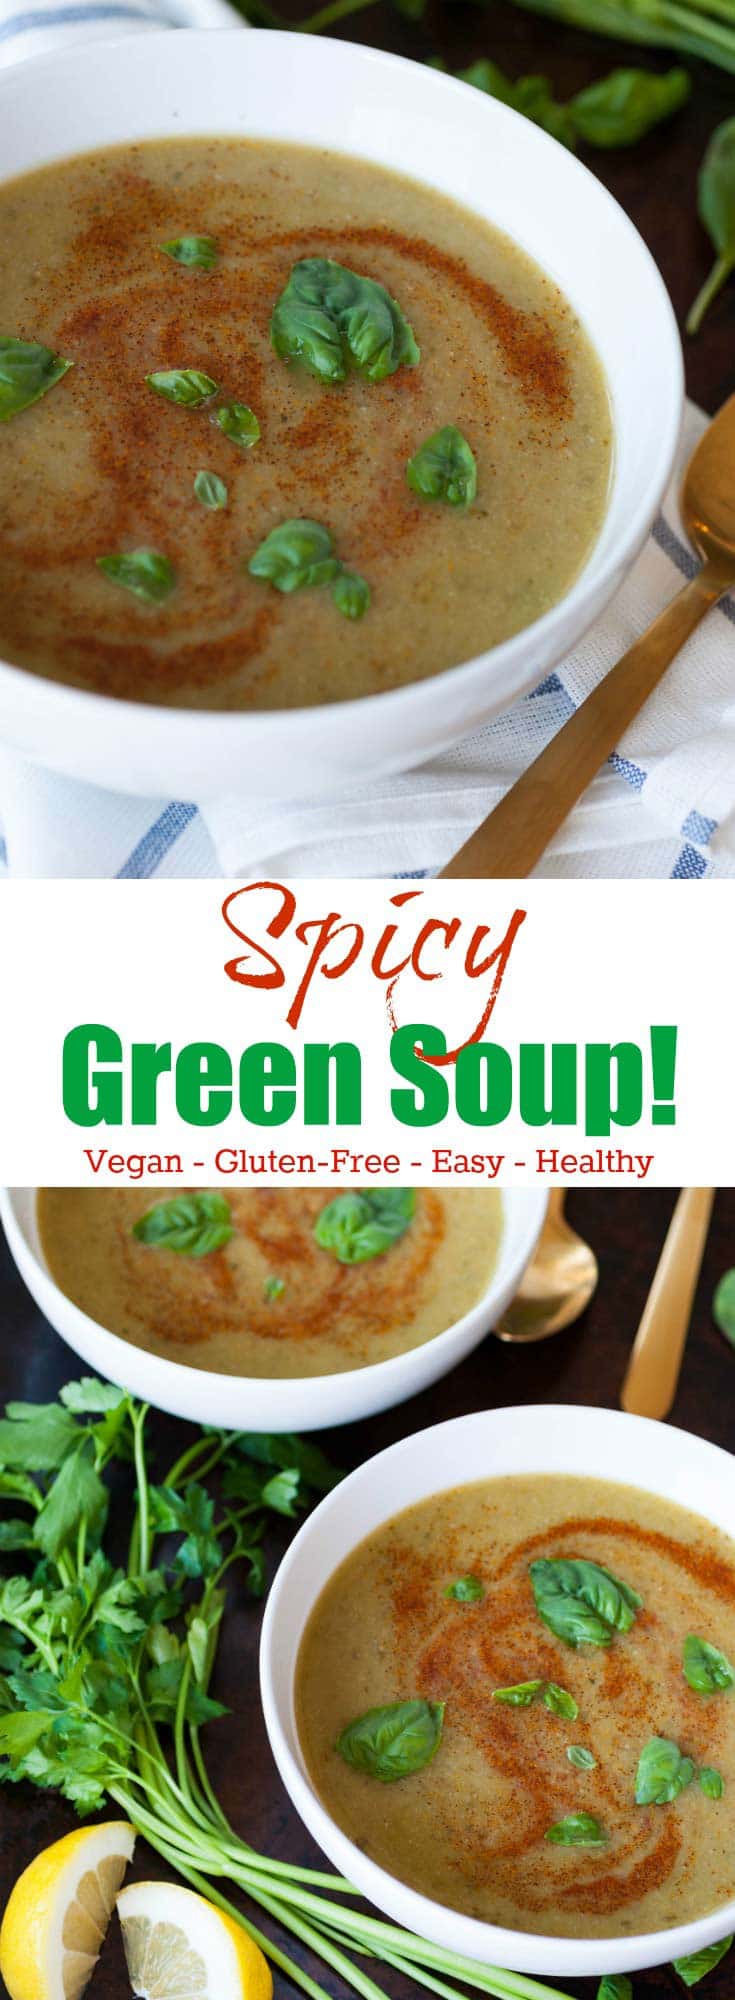 Spicy Green Soup is easy, healthy, vegan and gluten-free! Make it for dinner tonight!